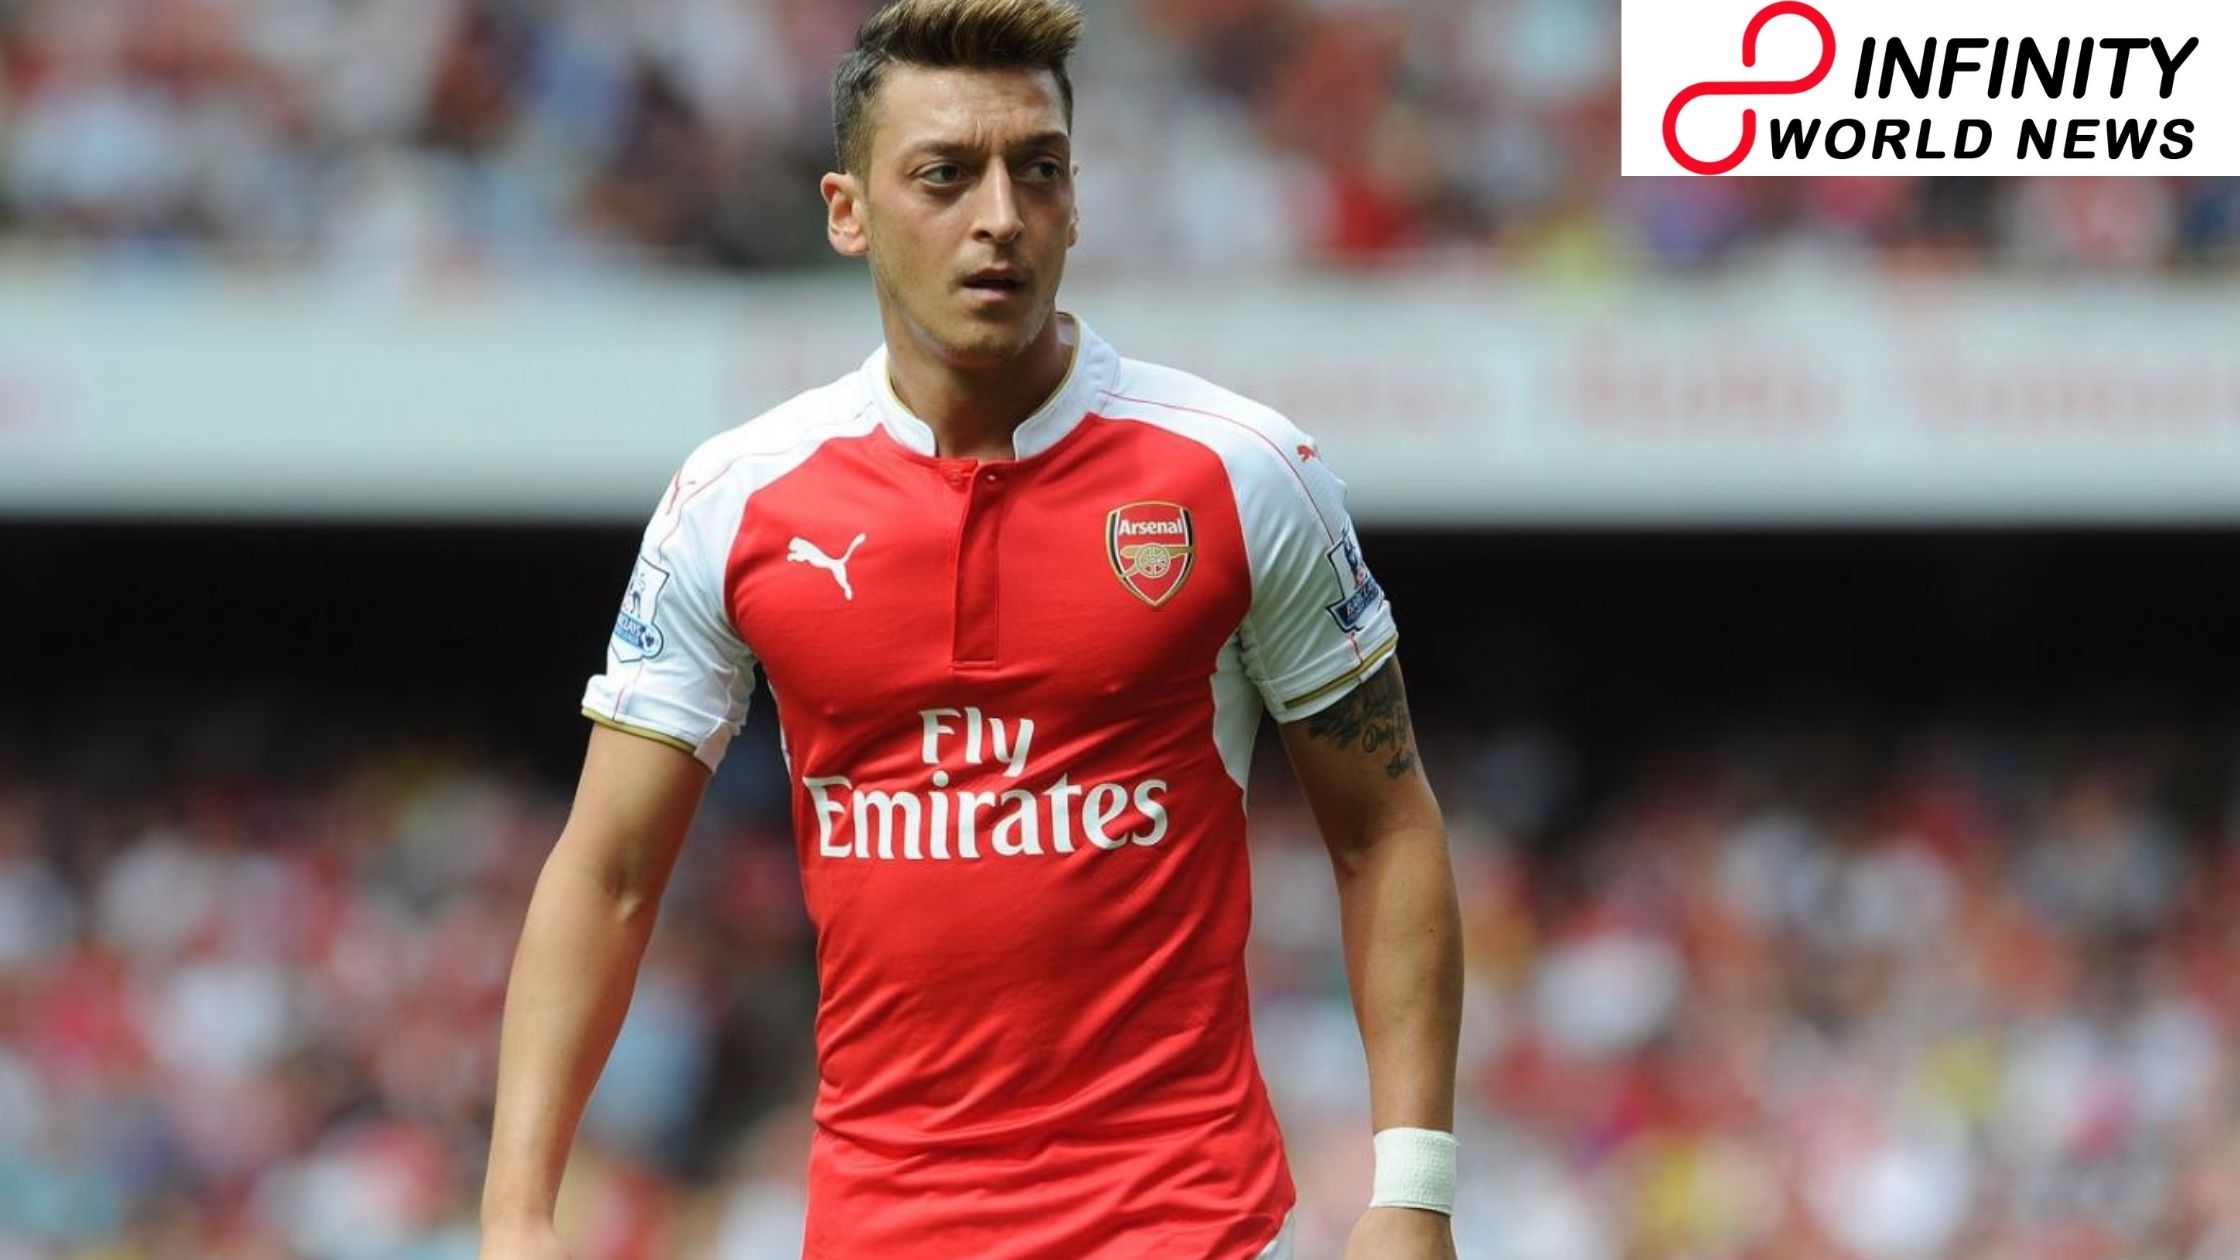 Mesut Ozil to end Arsenal contract, move to Fenerbahce